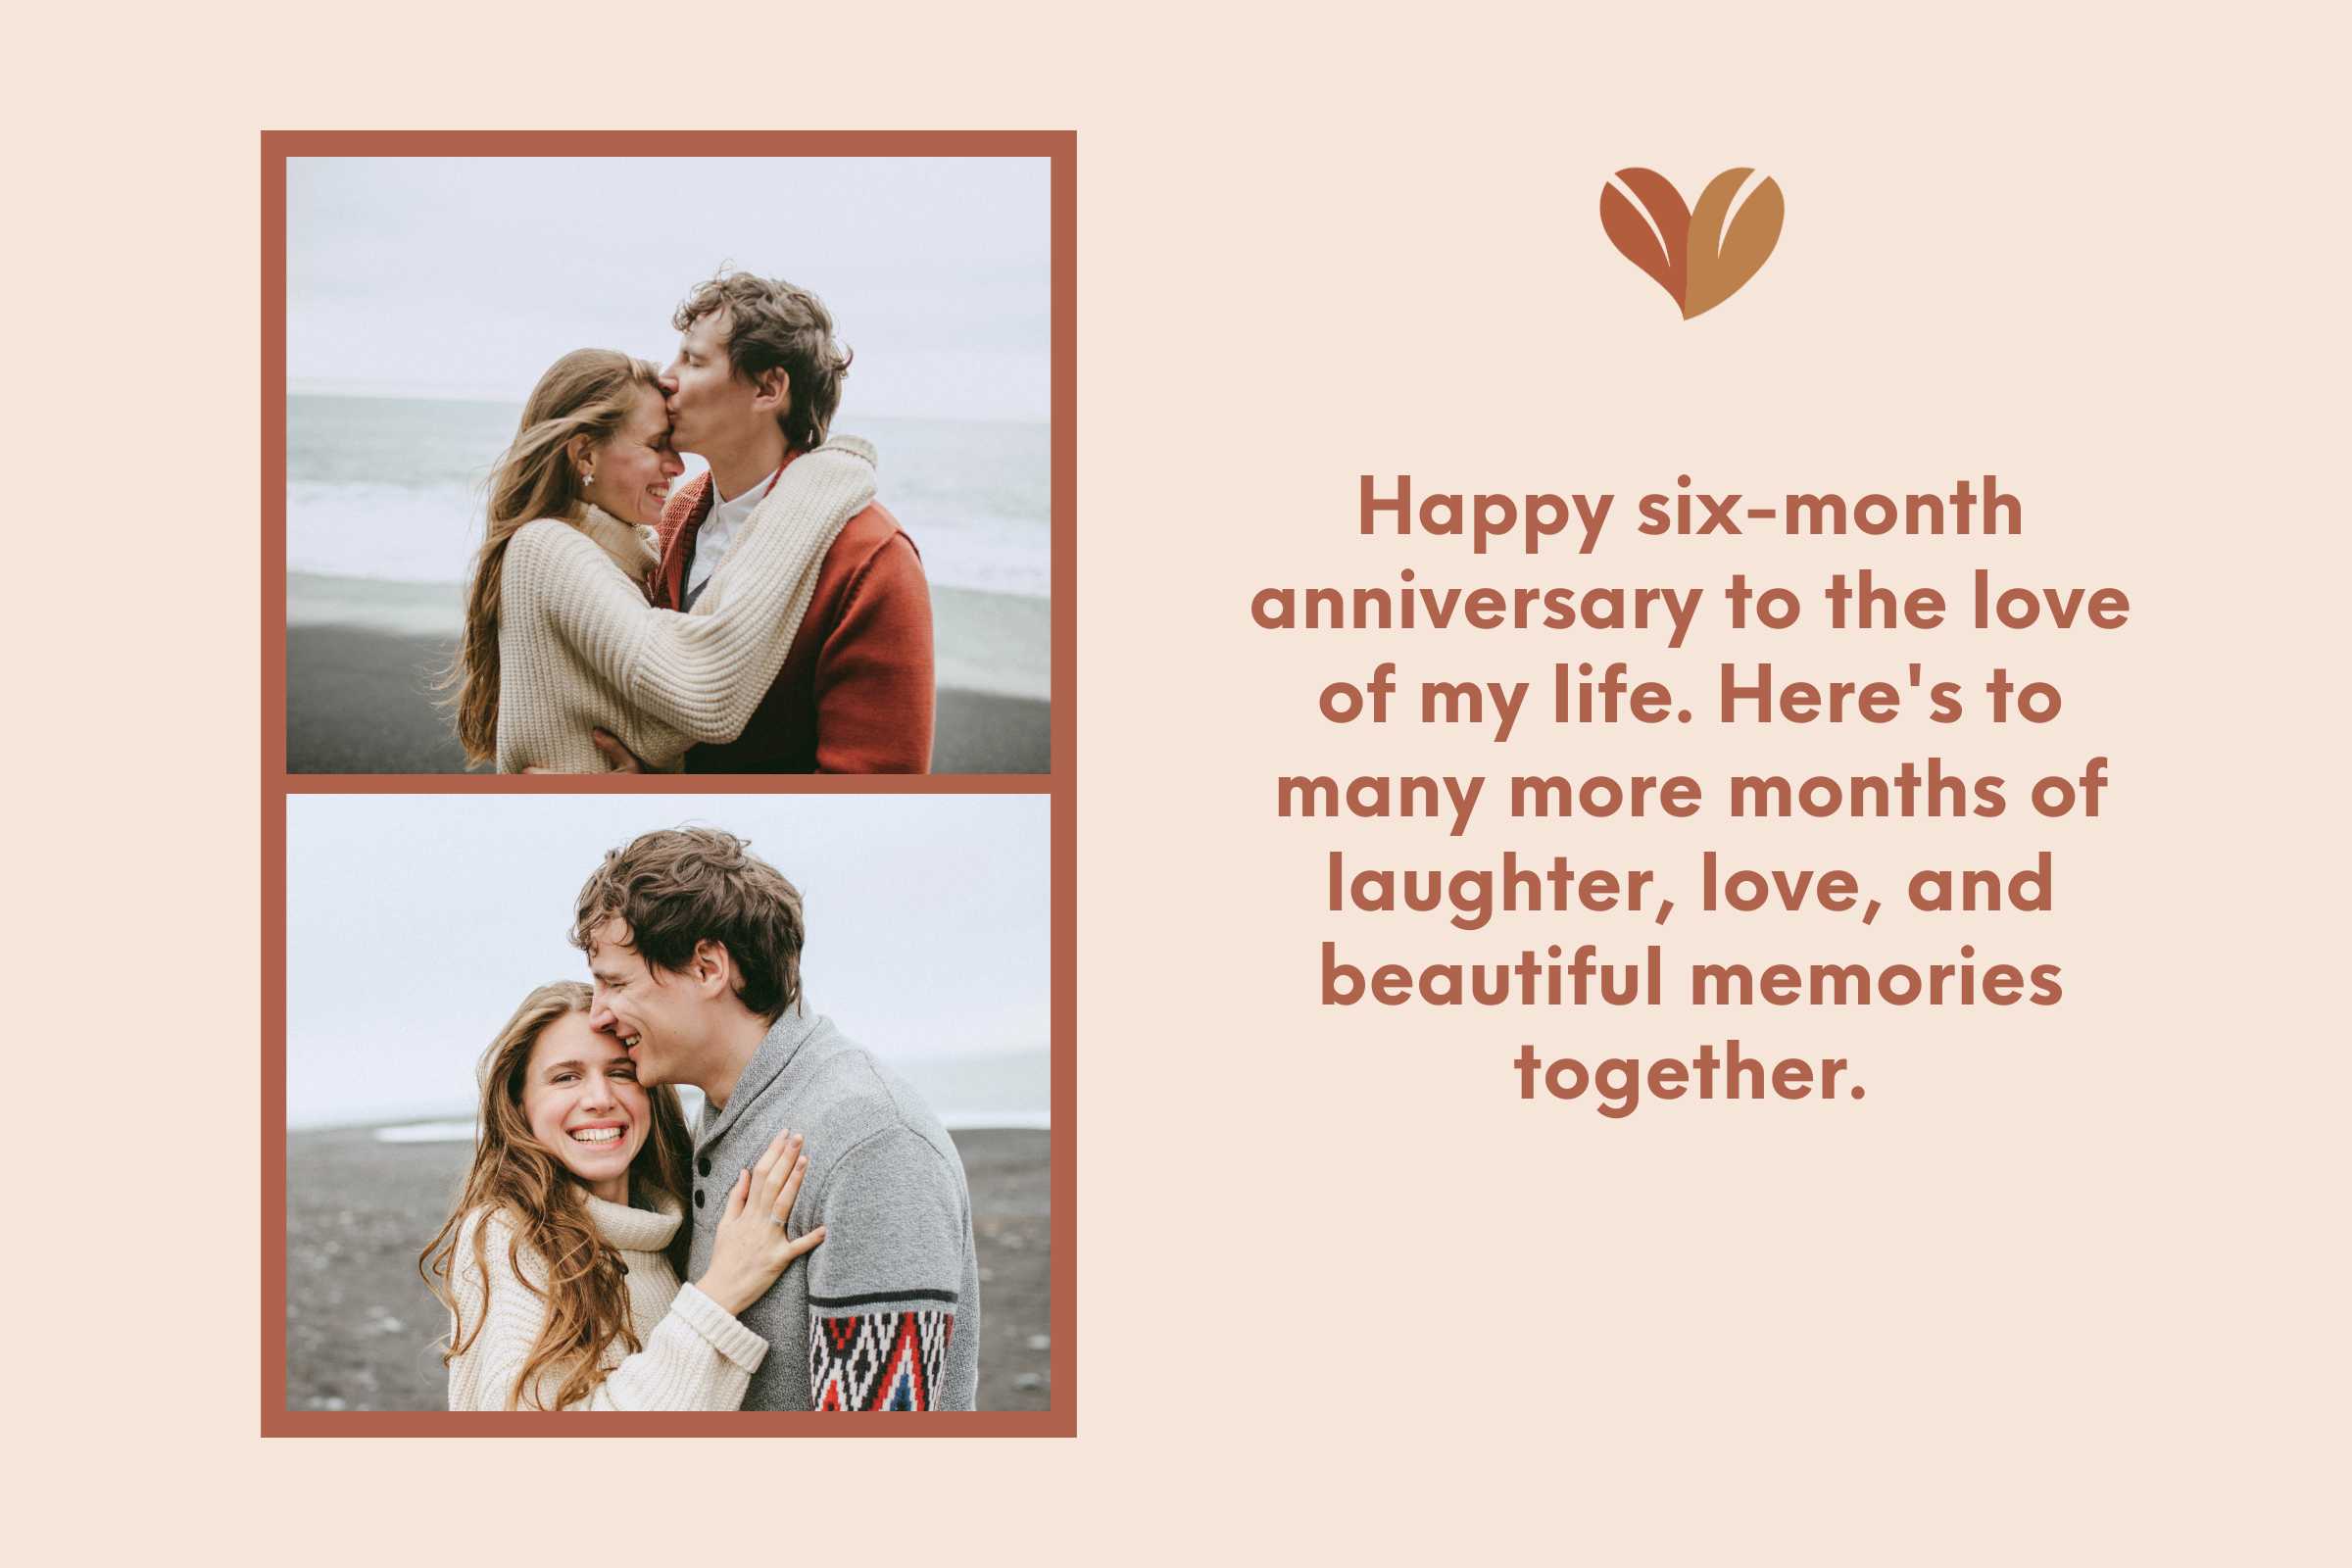 Wishing you continued love and happiness - happy anniversary six-months